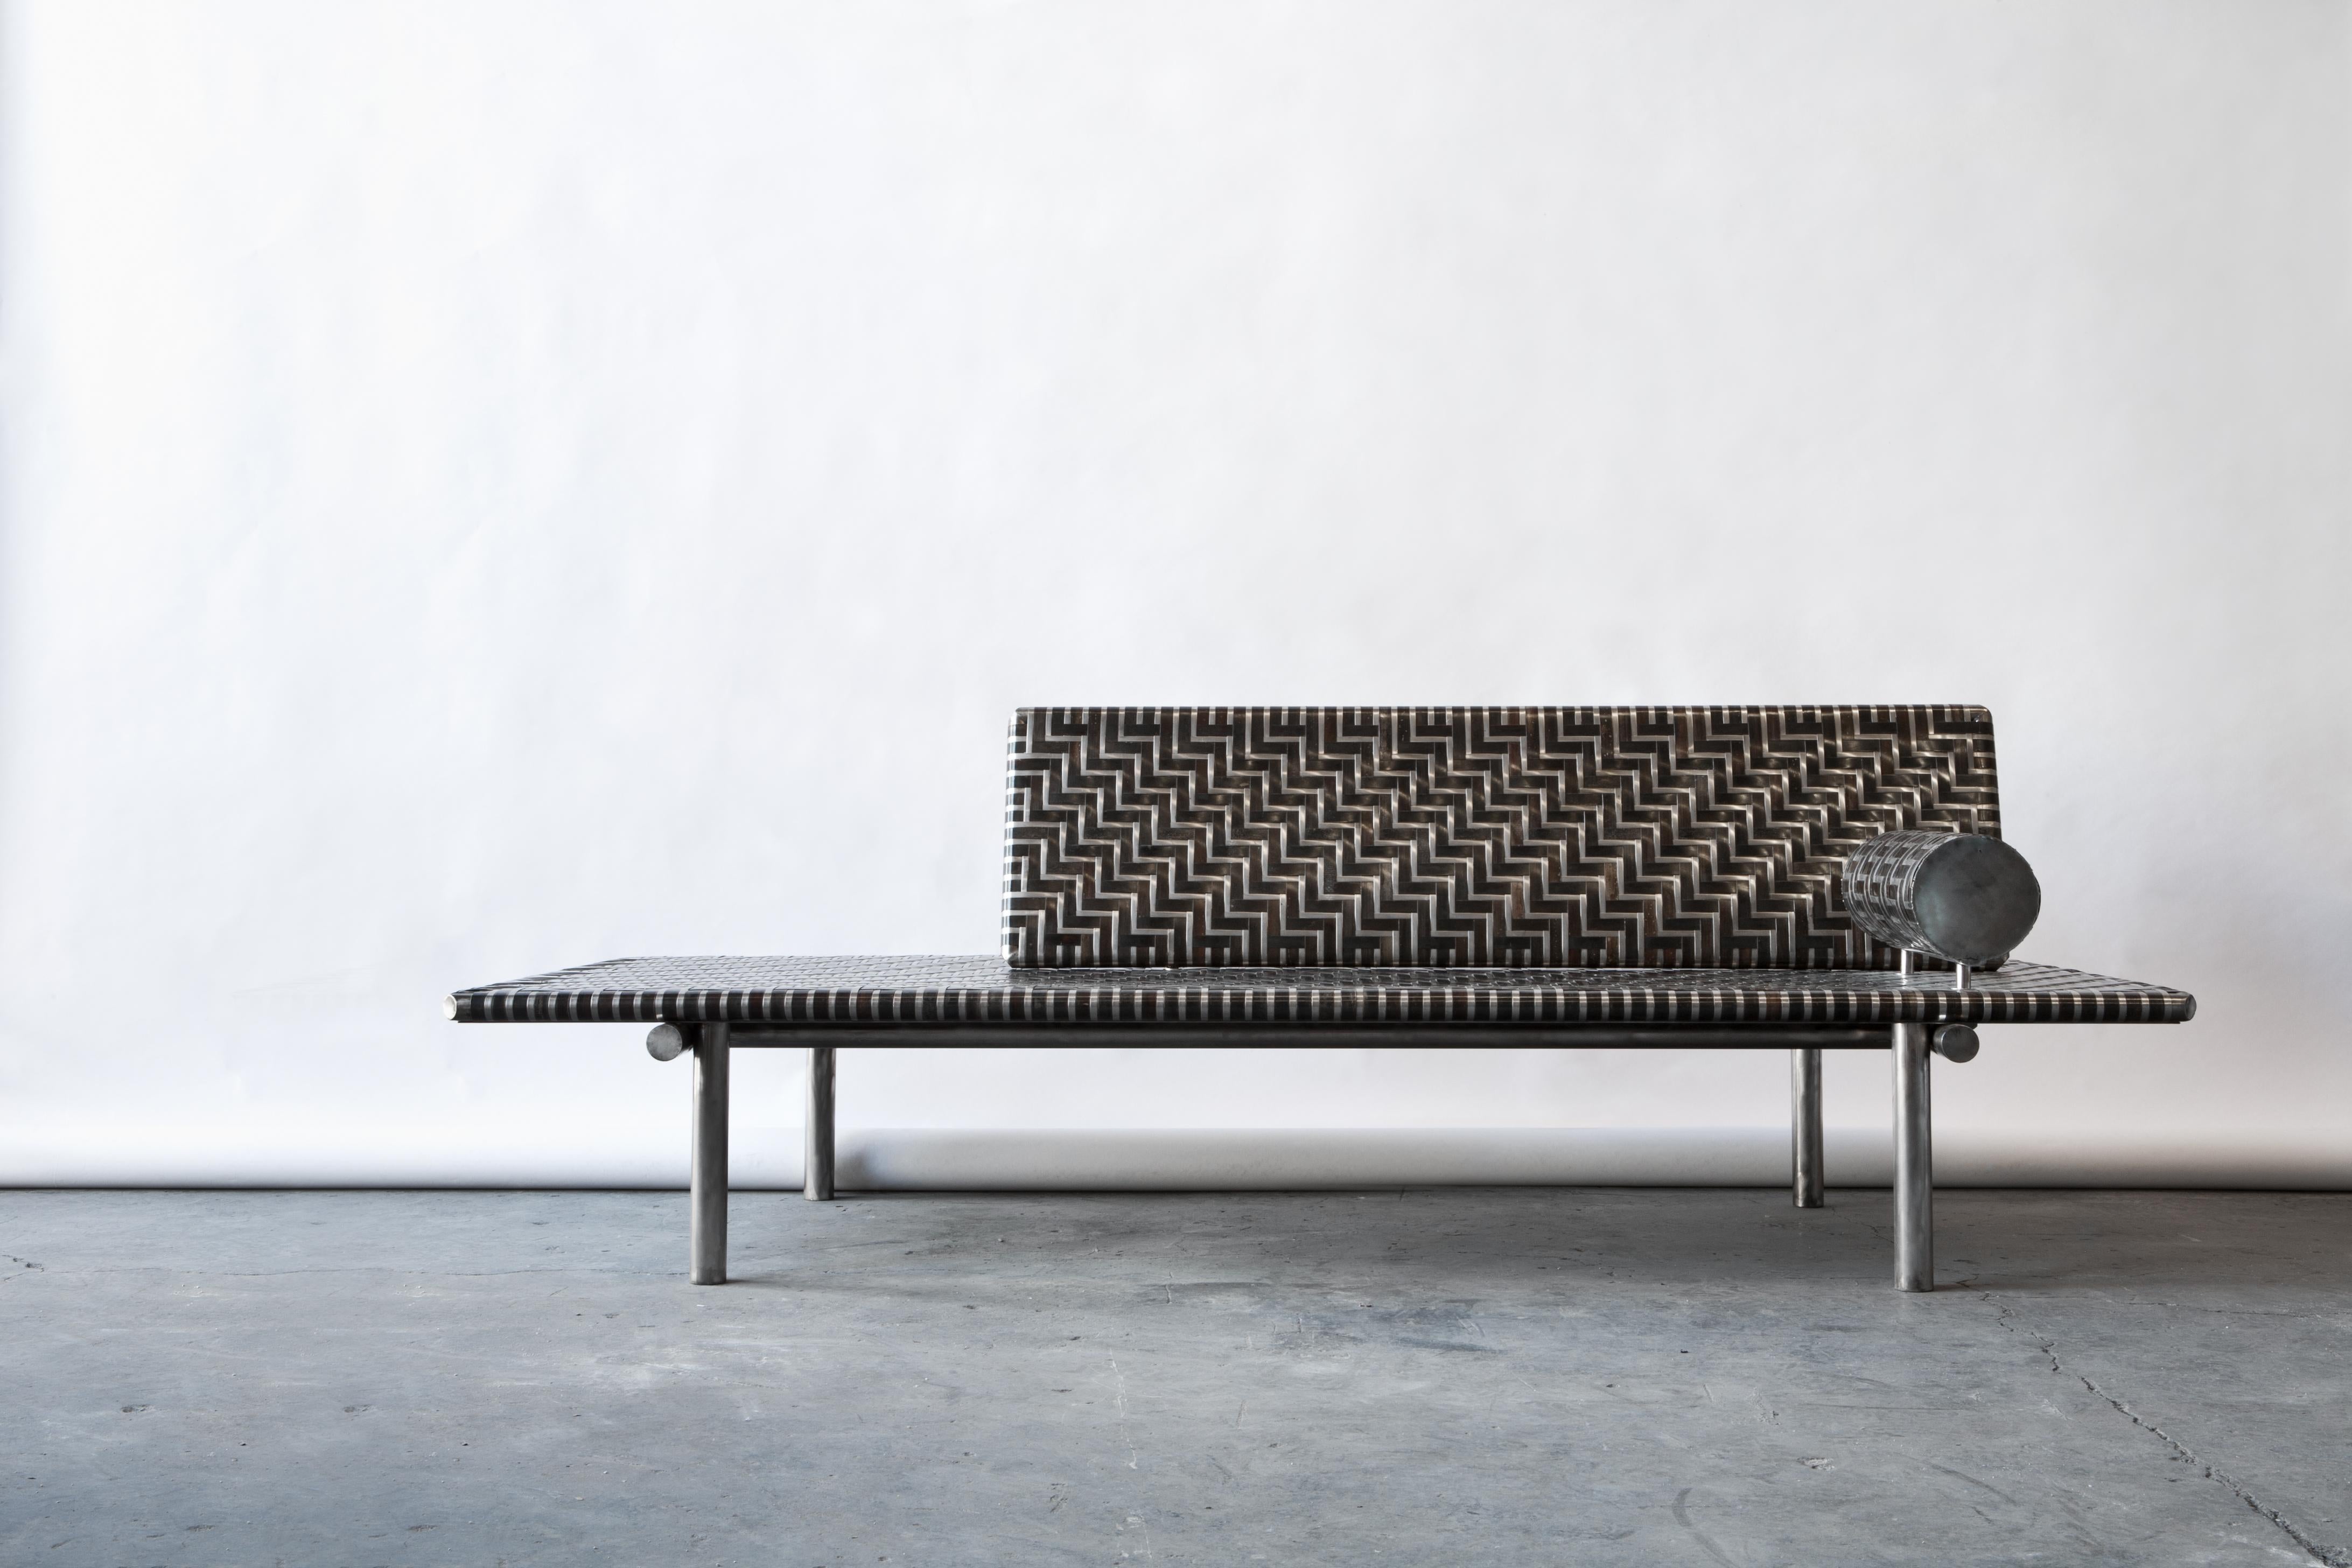 Franz Chaise by Michael Gittings
Edition of 3
Dimensions: d 90 x w 240 x h 80 cm
Materials: stainless steel

Michael Gittings
Melbourne based designer Michael Gittings aims to
Challenge pre-conceptions around furniture,